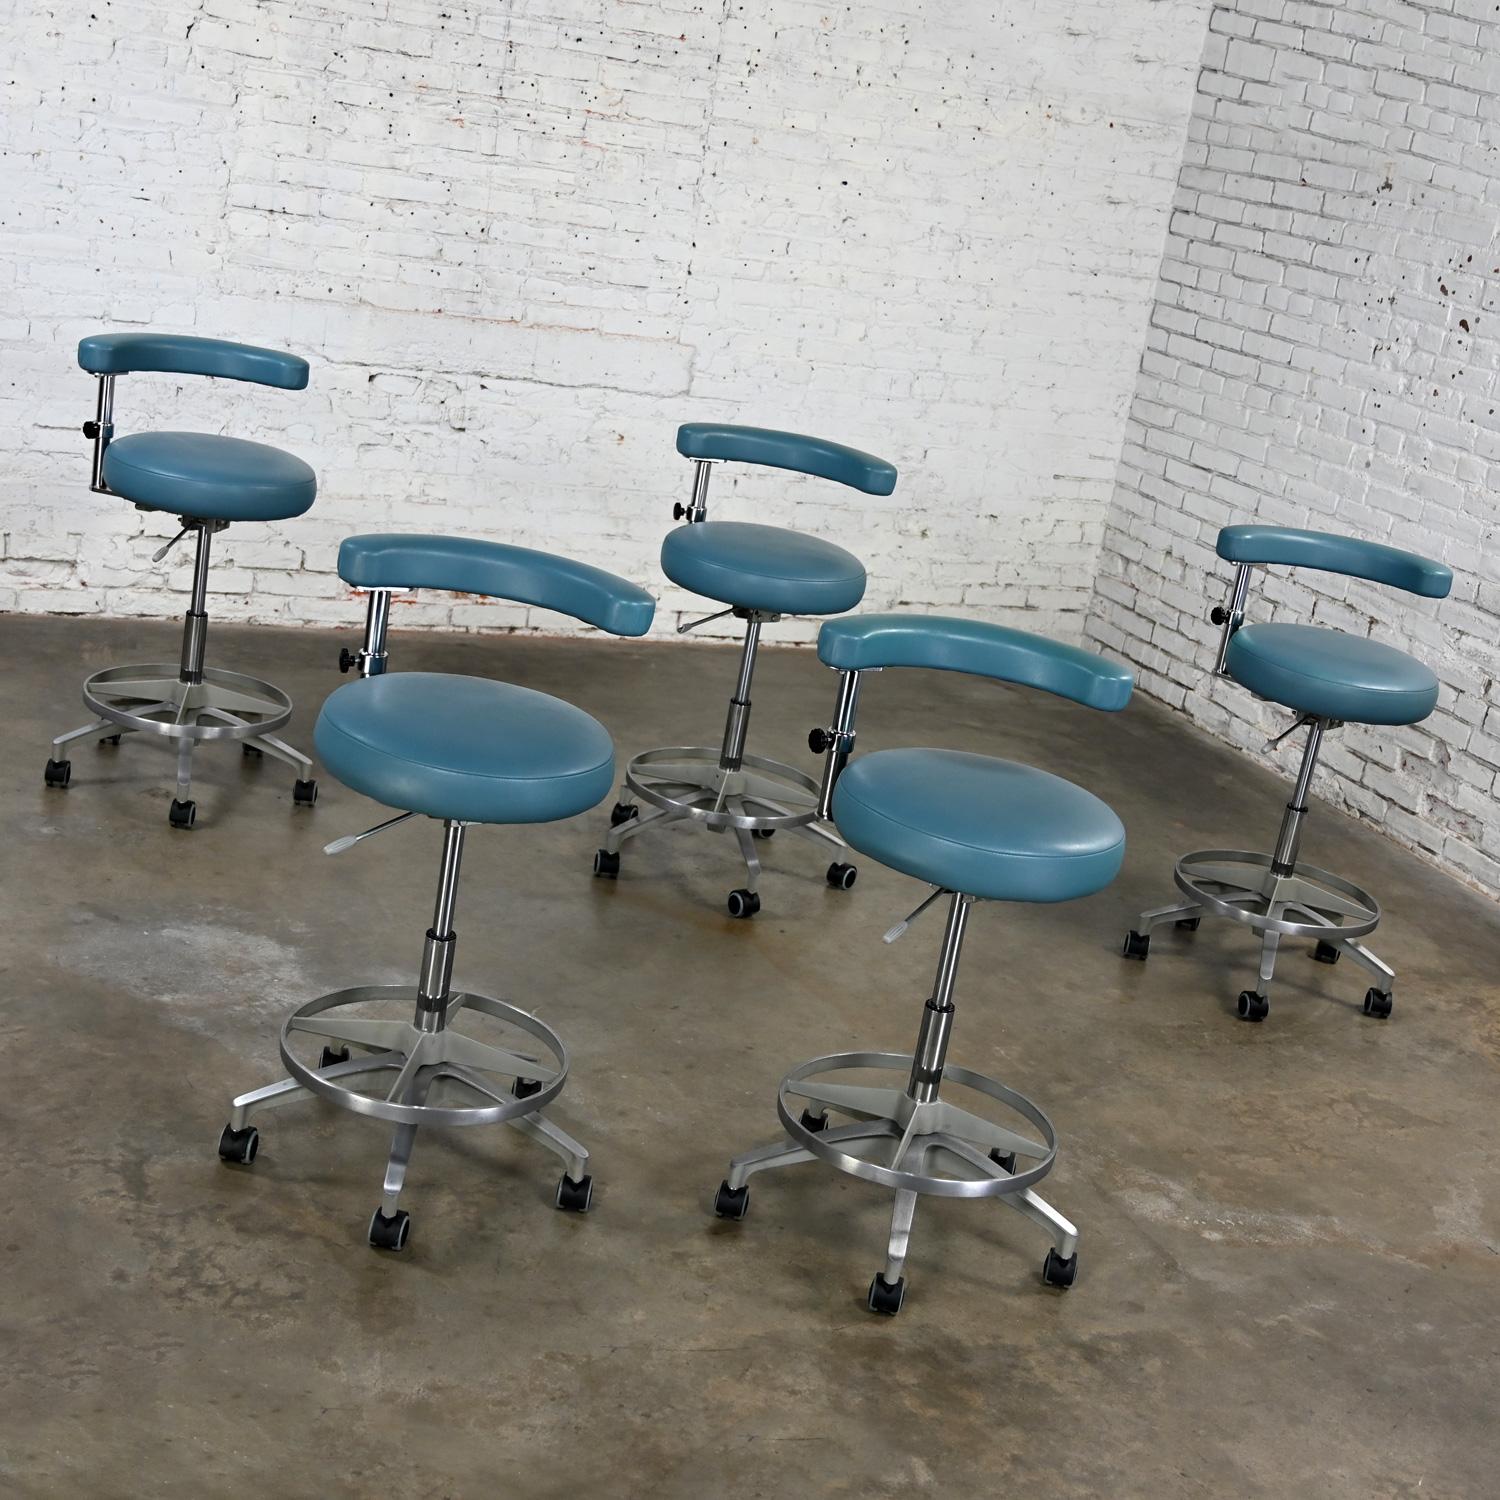 Late 20th Century Industrial Barstools Steel Blue Faux Leather & Chrome Set 5 In Good Condition For Sale In Topeka, KS